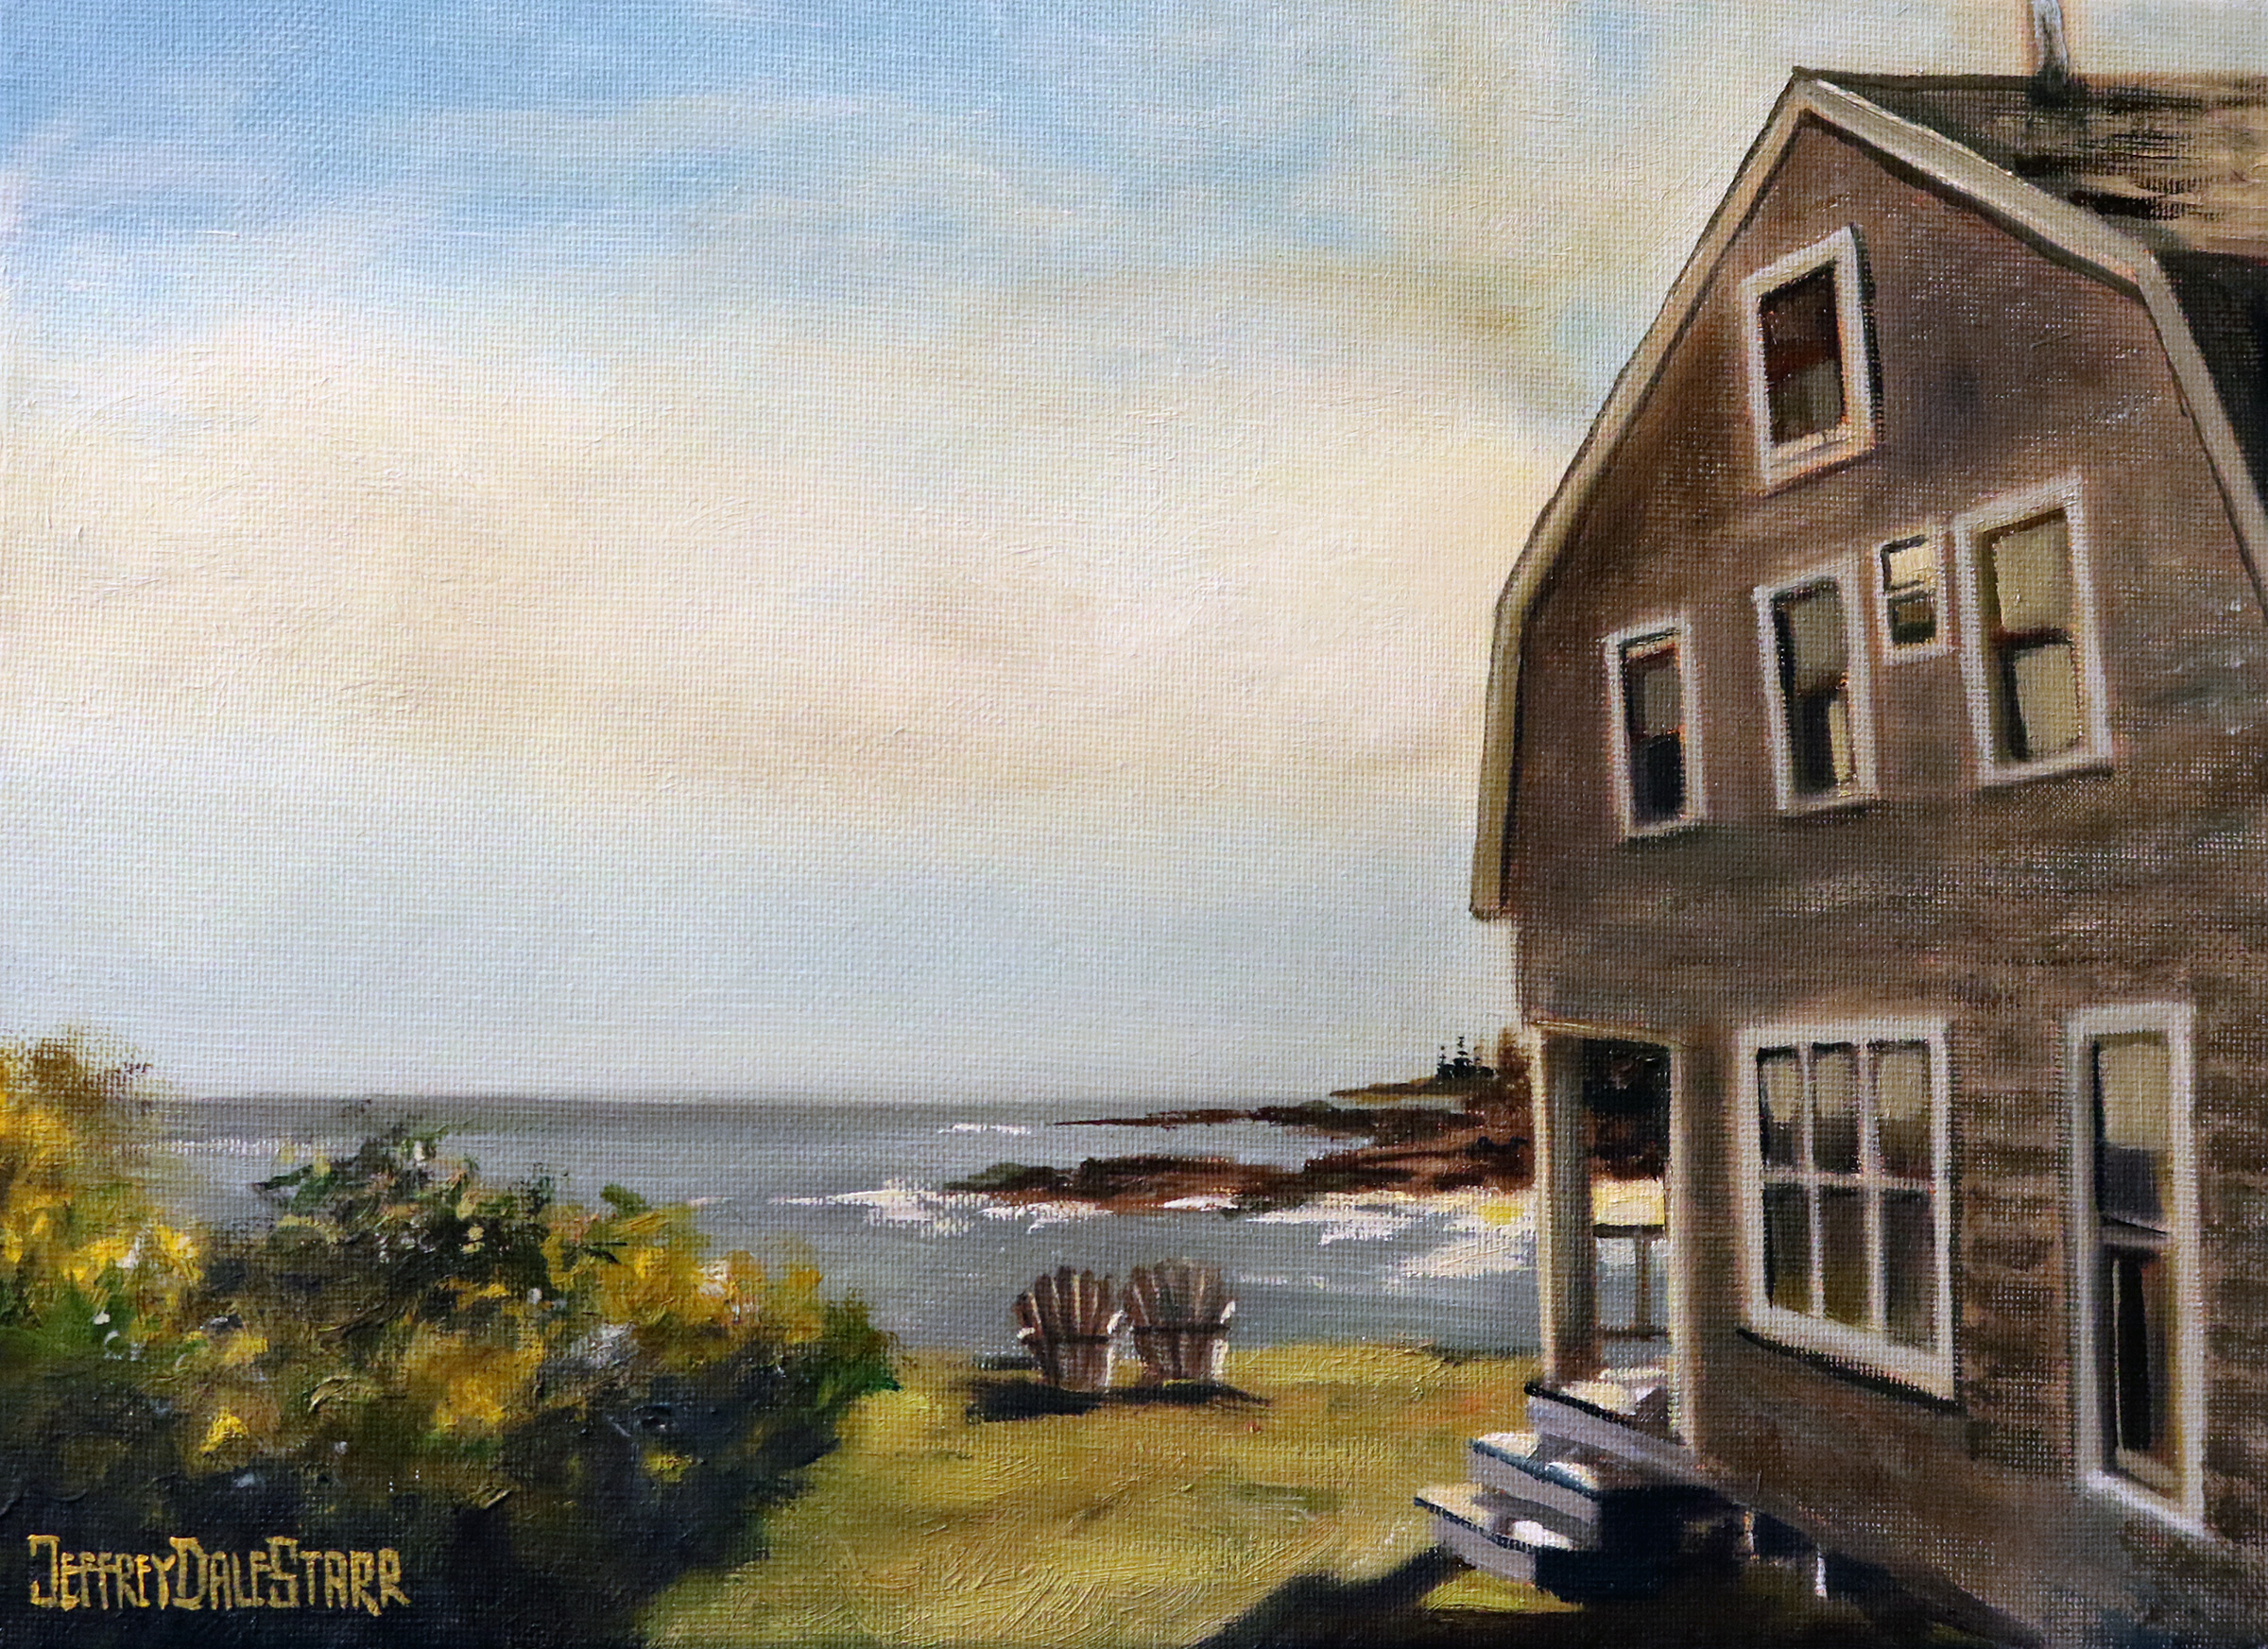 Oil painting "The Driftwood Inn, Bailey Island, Maine" by Jeffrey Dale Starr